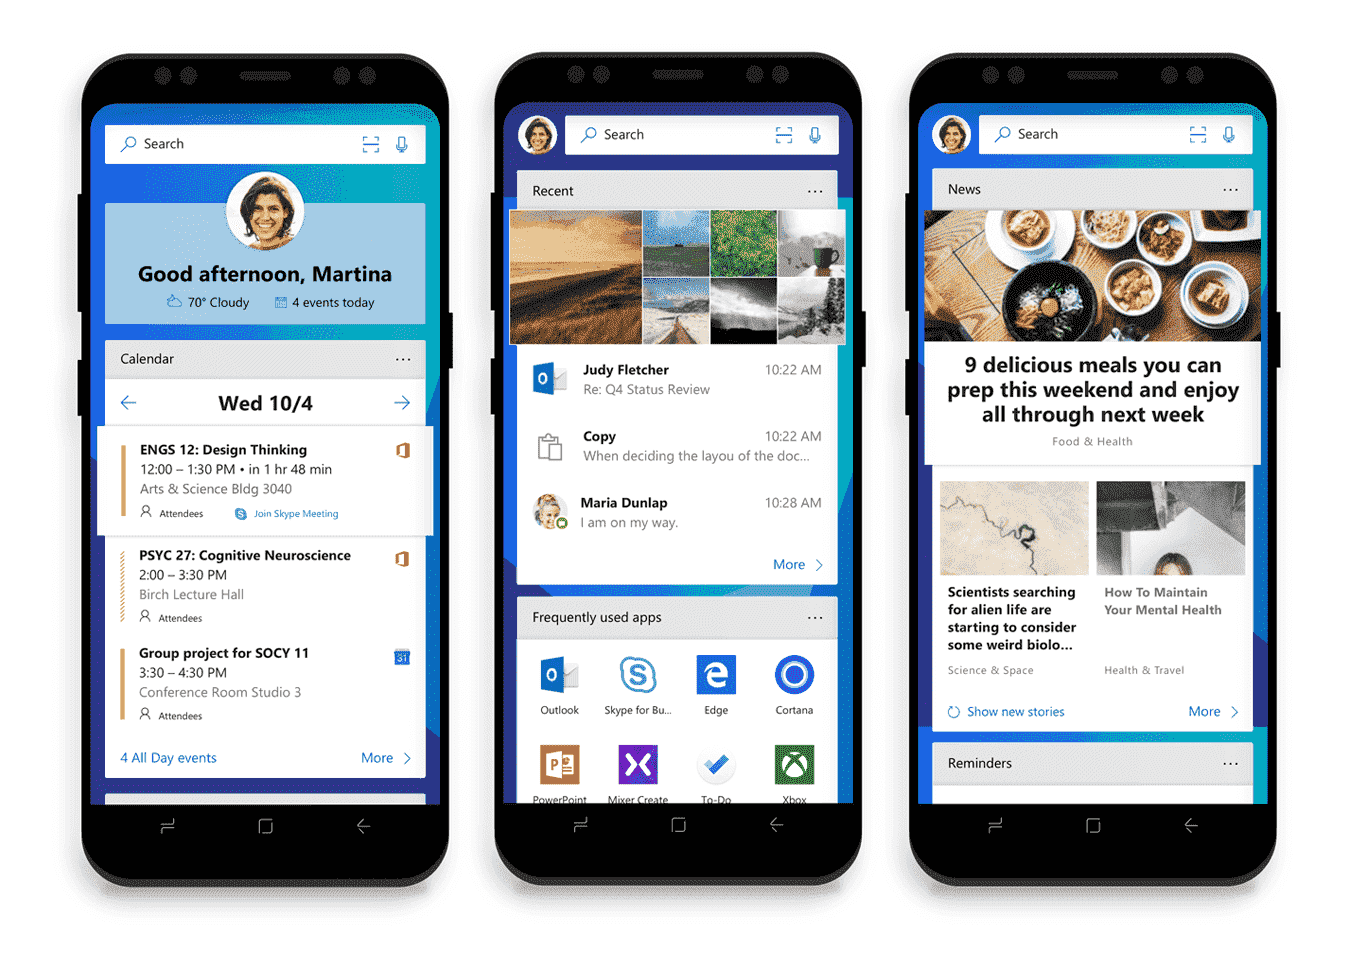 Microsoft Launcher app 4.12.0.44682 version for Android - August 1 8268874d2e645d4bb0948d74441562cd.png